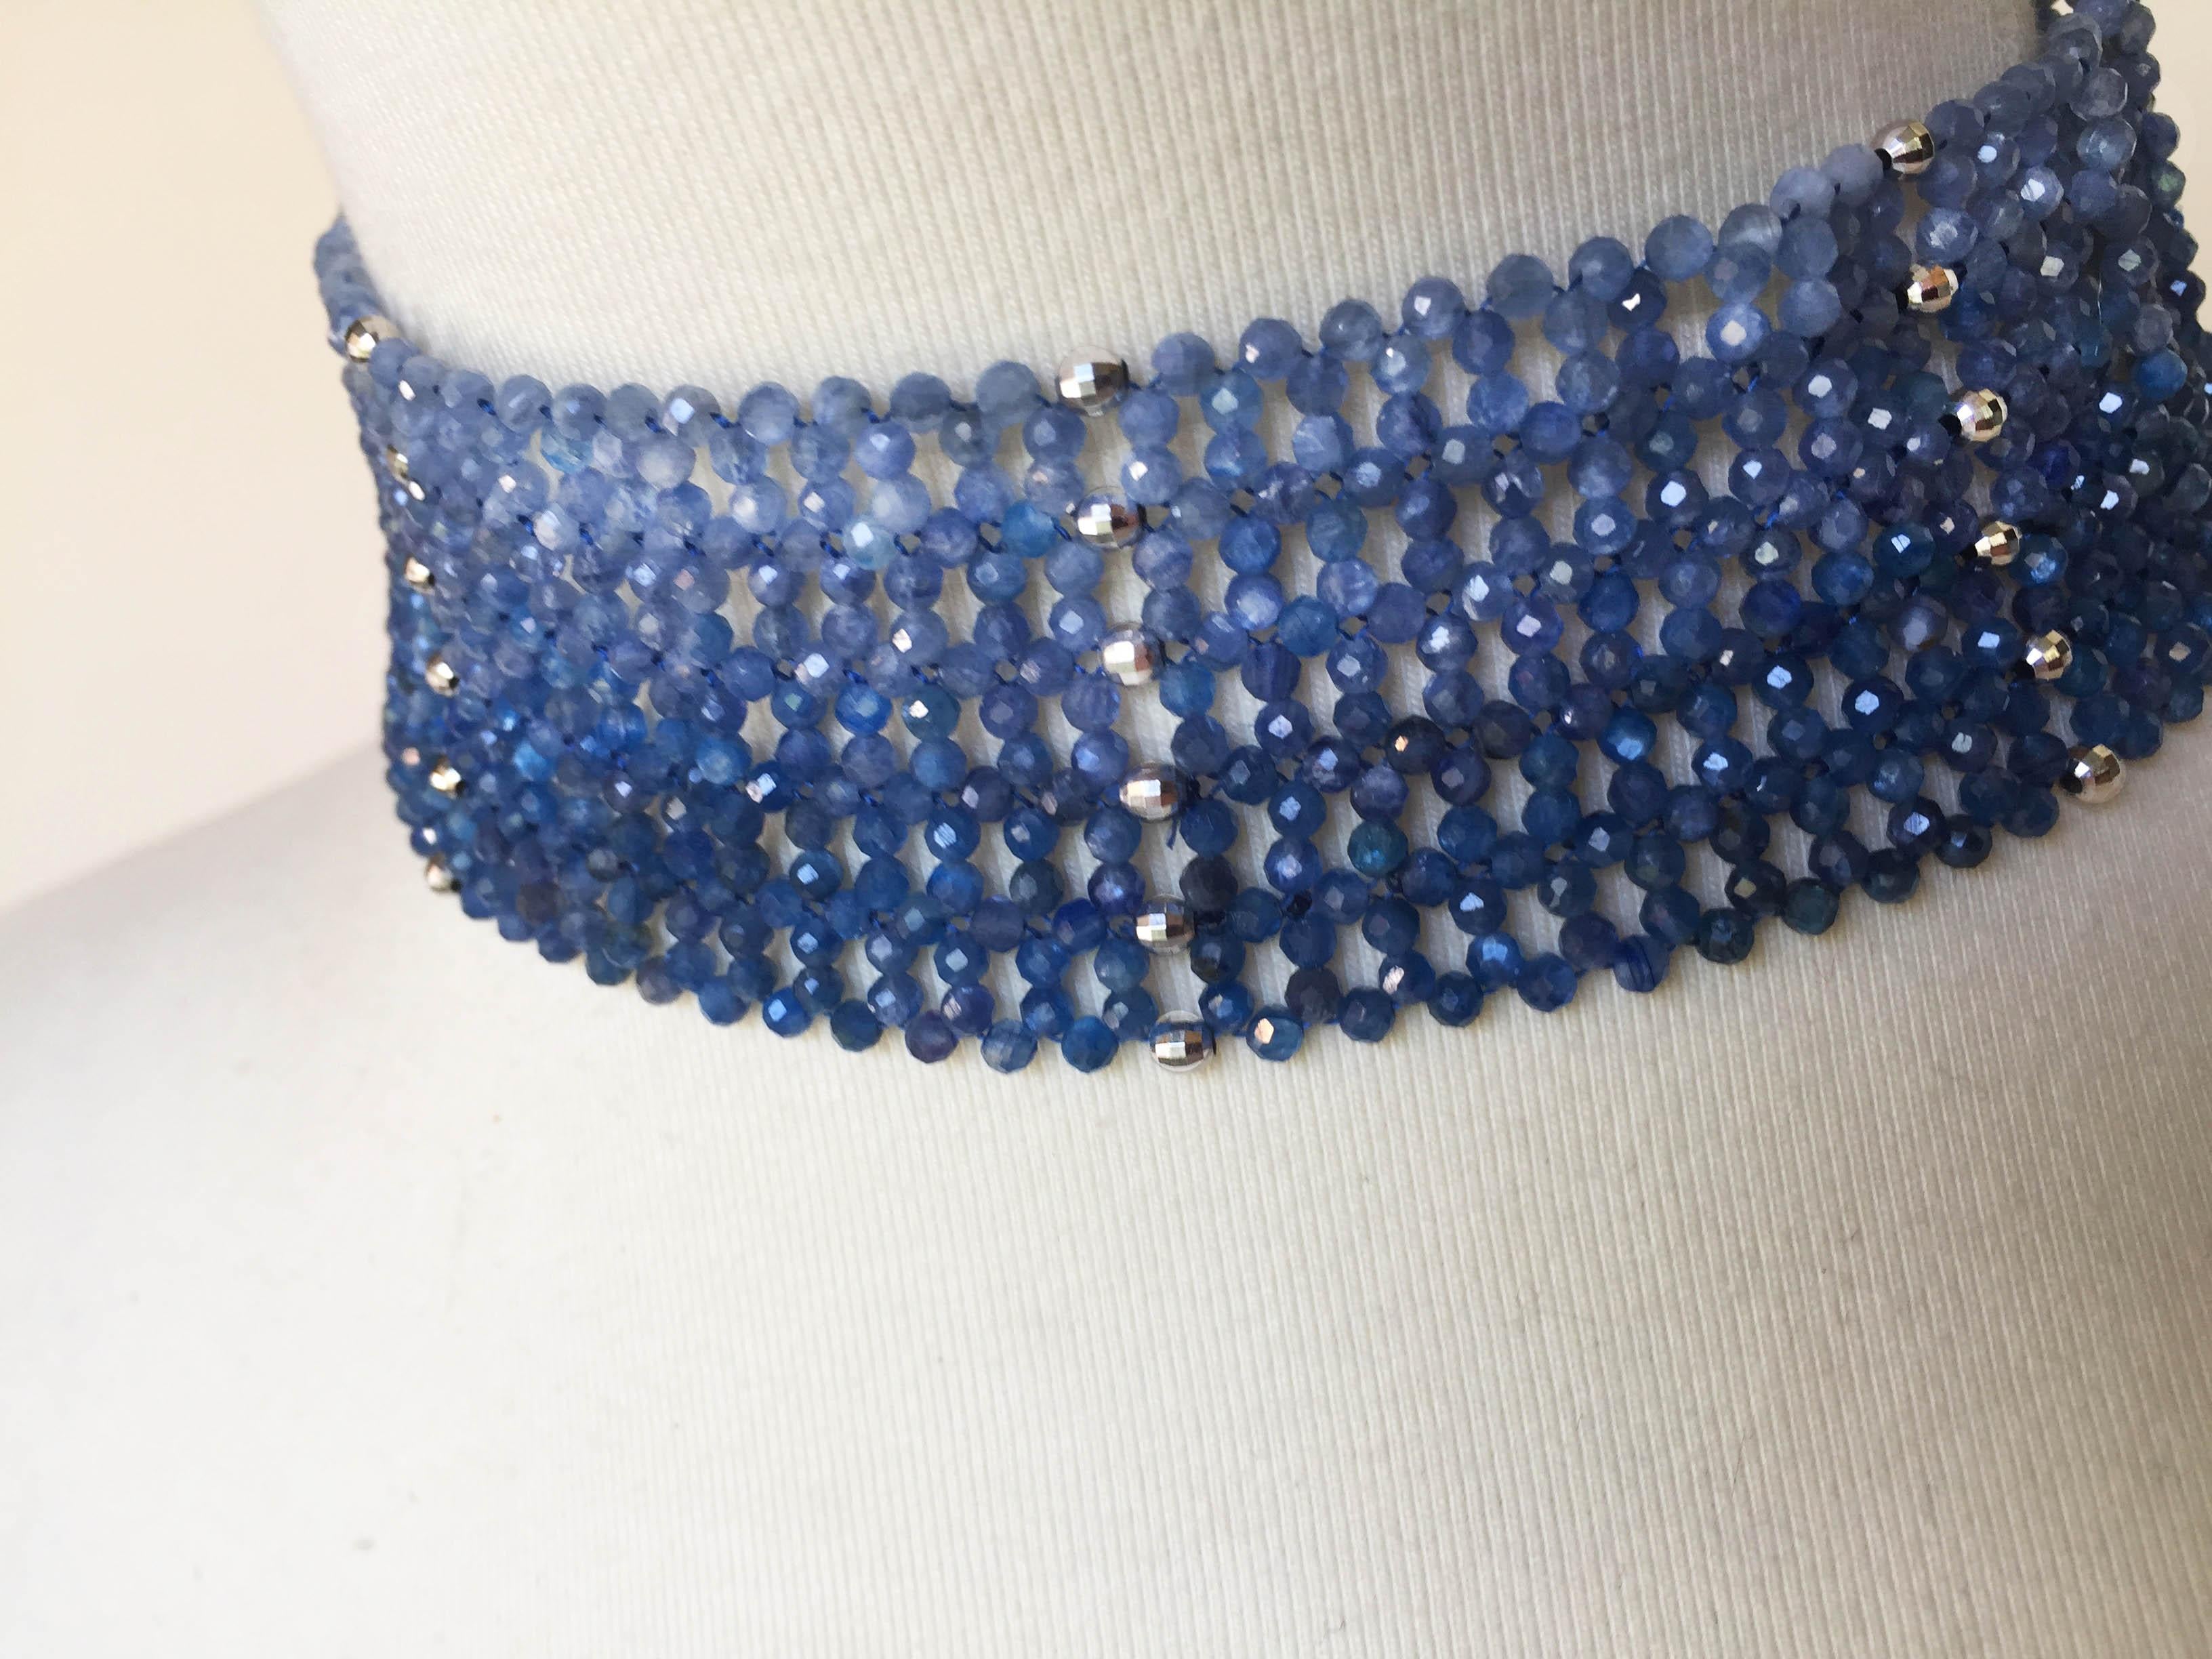 Women's Woven Kyanite Beaded Choker with Sterling Silver Beads and Clasp